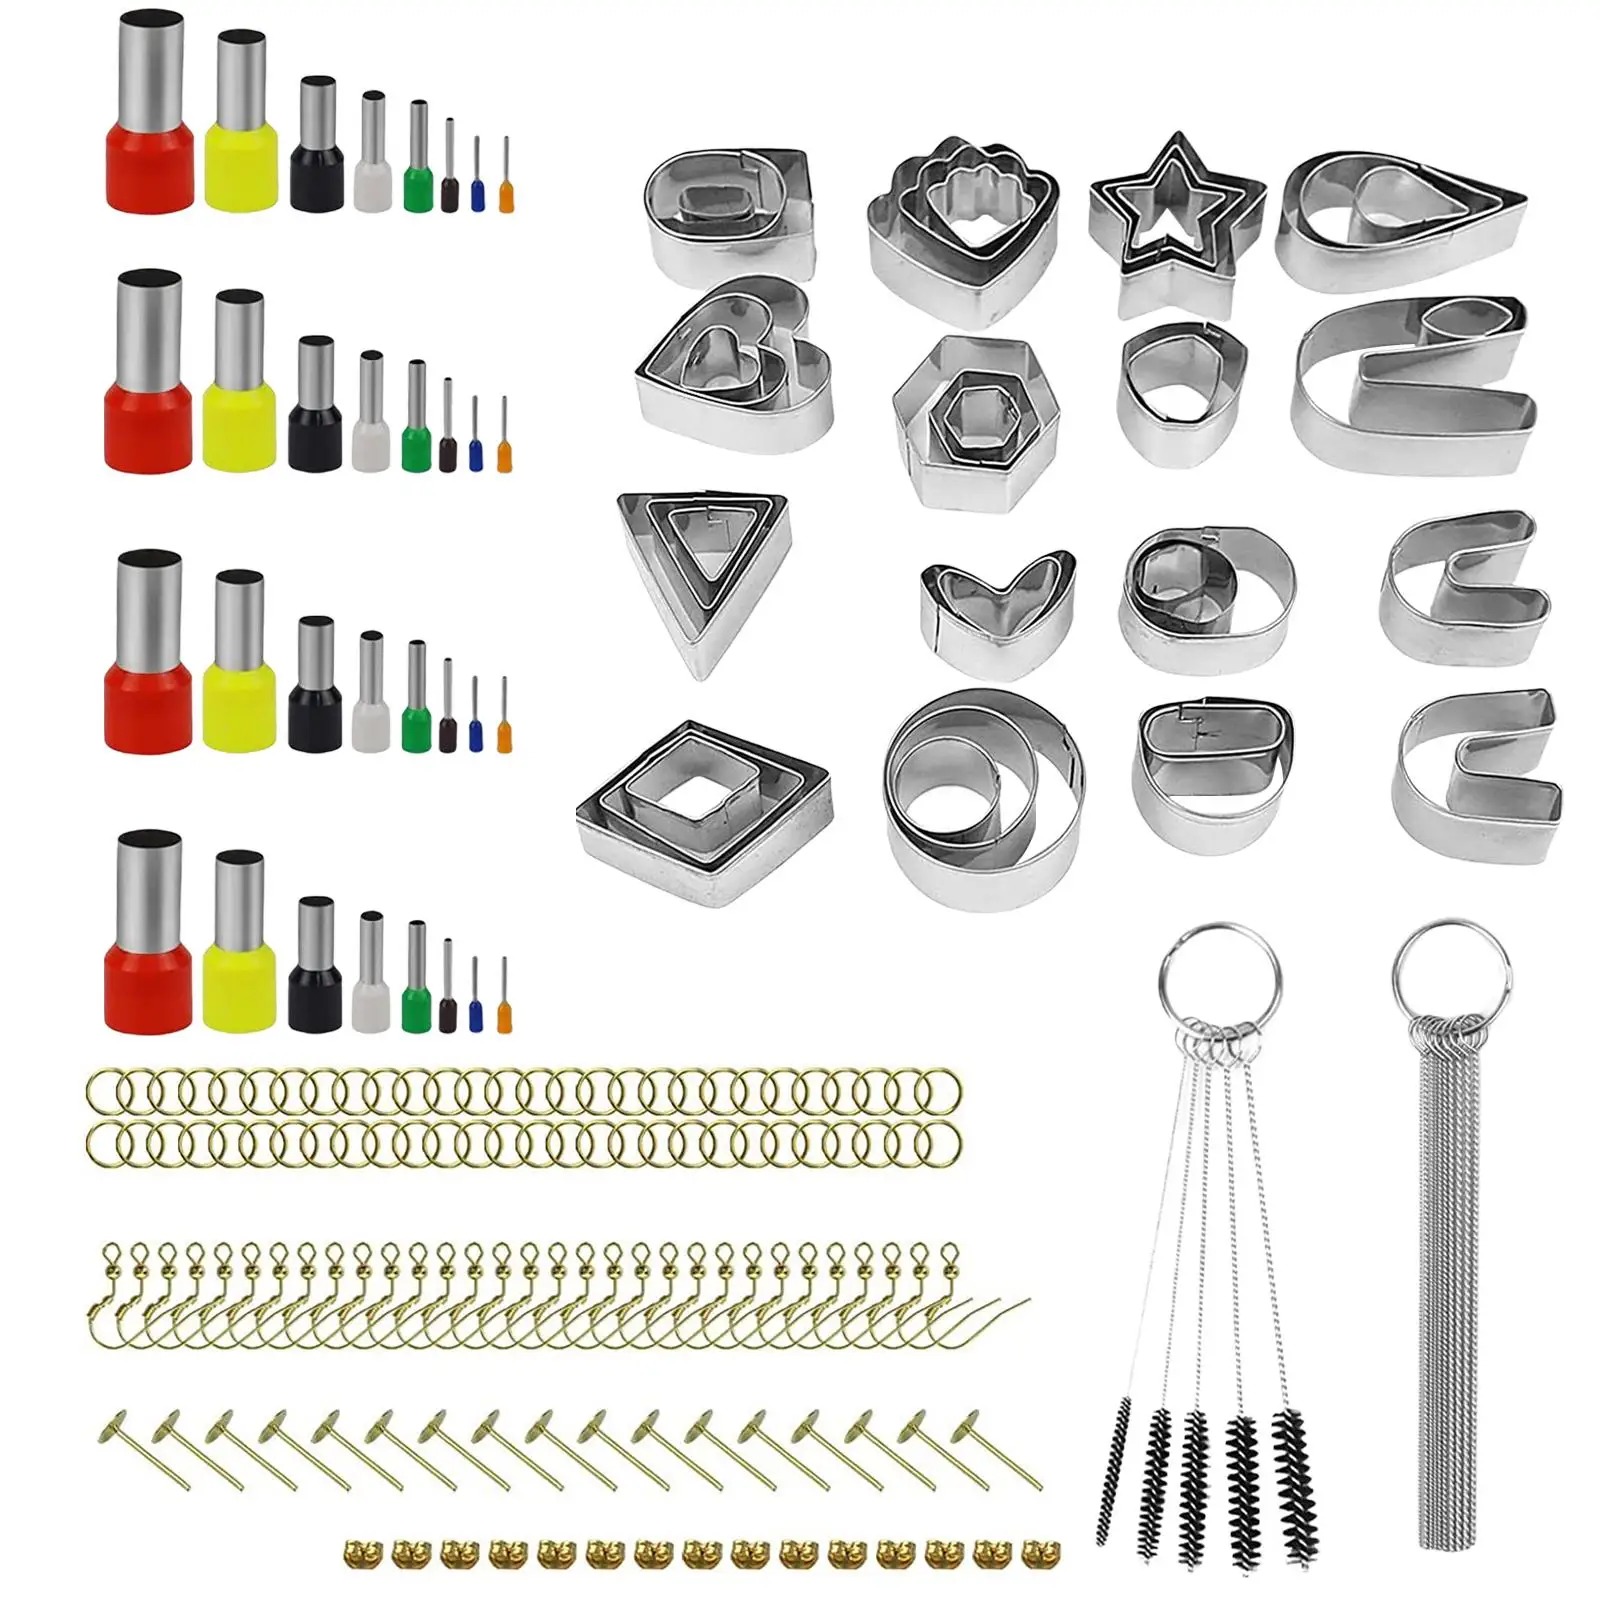 169x Polymer Clay Cutters Set Jewelry Pendant Making Earring Cutting Mold Making Kit Earrings Accessory DIY Craft for Adults